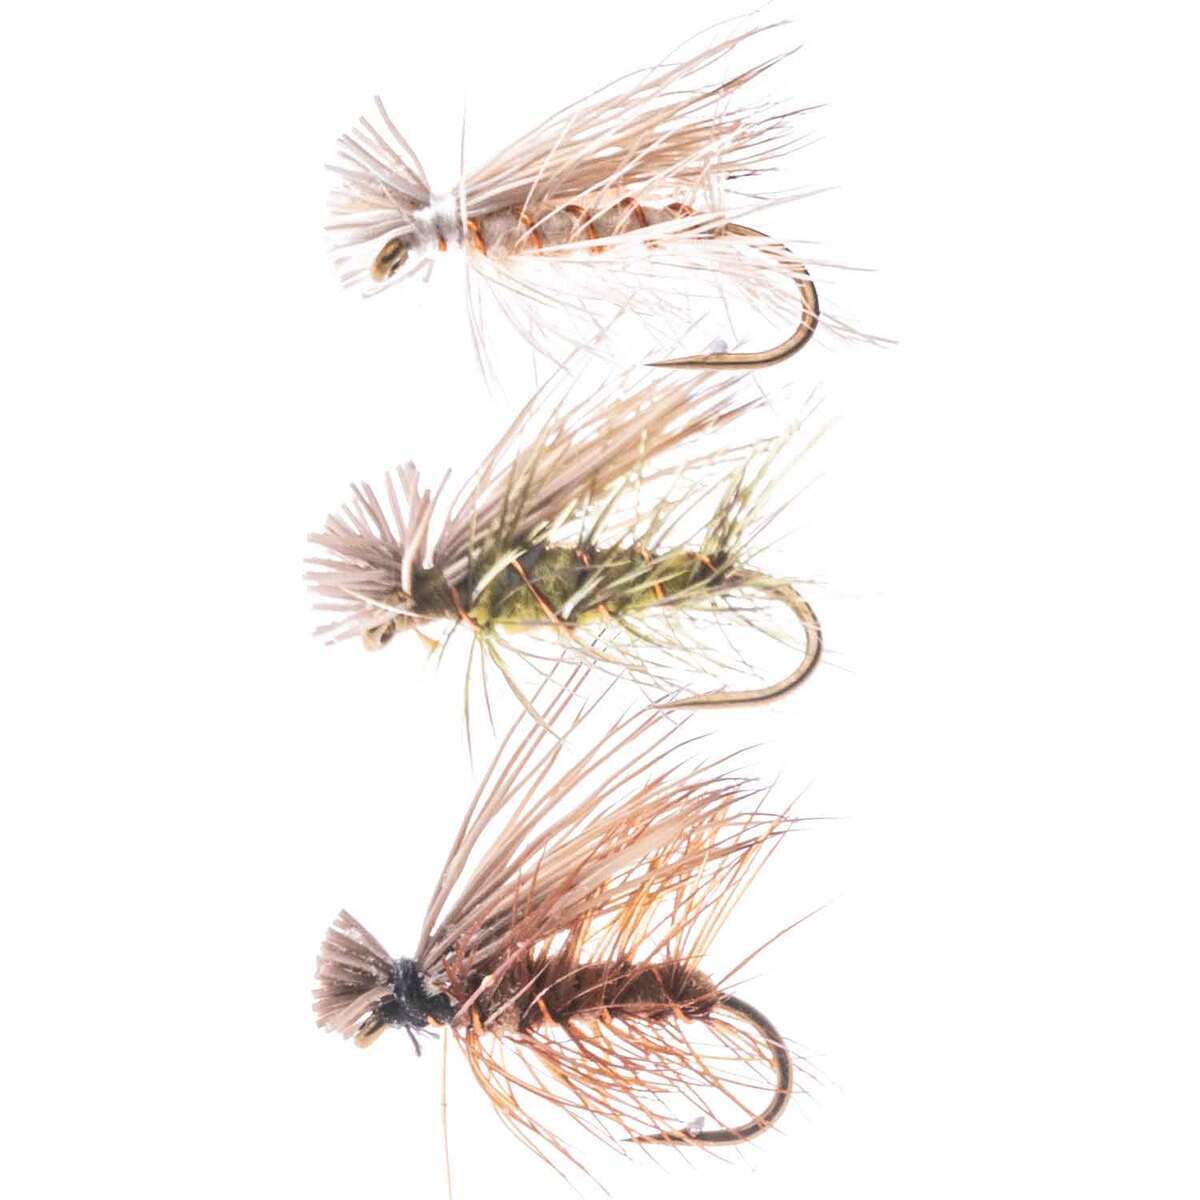 RoundRocks Caddis Fly - 6 Pack - Green 16 by Sportsman's Warehouse